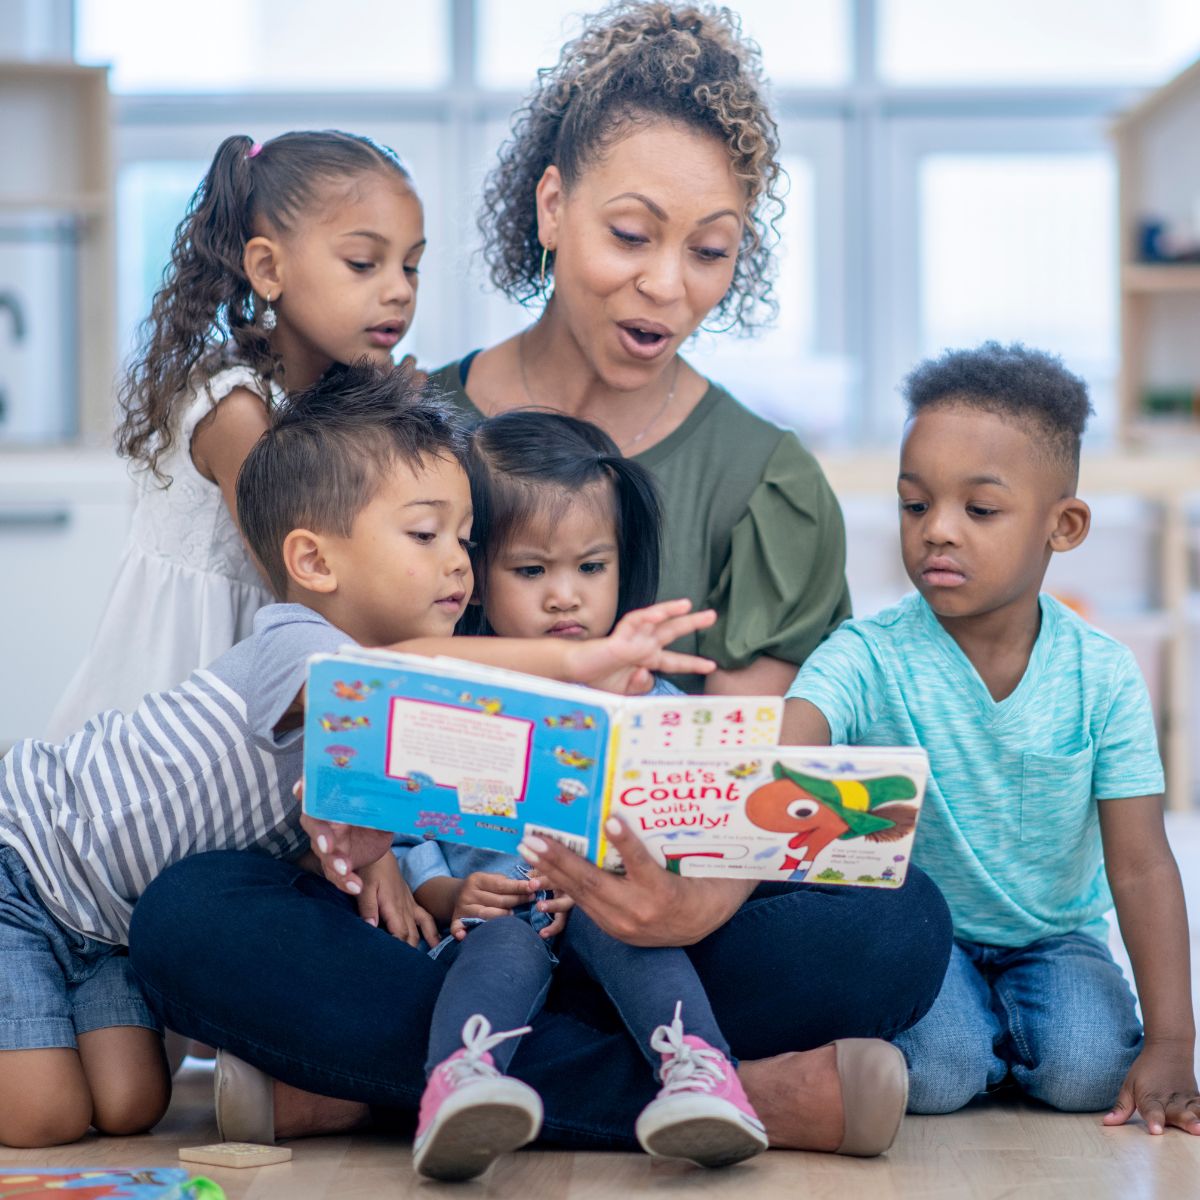 A woman reading a picture book to four small children in a classroom.